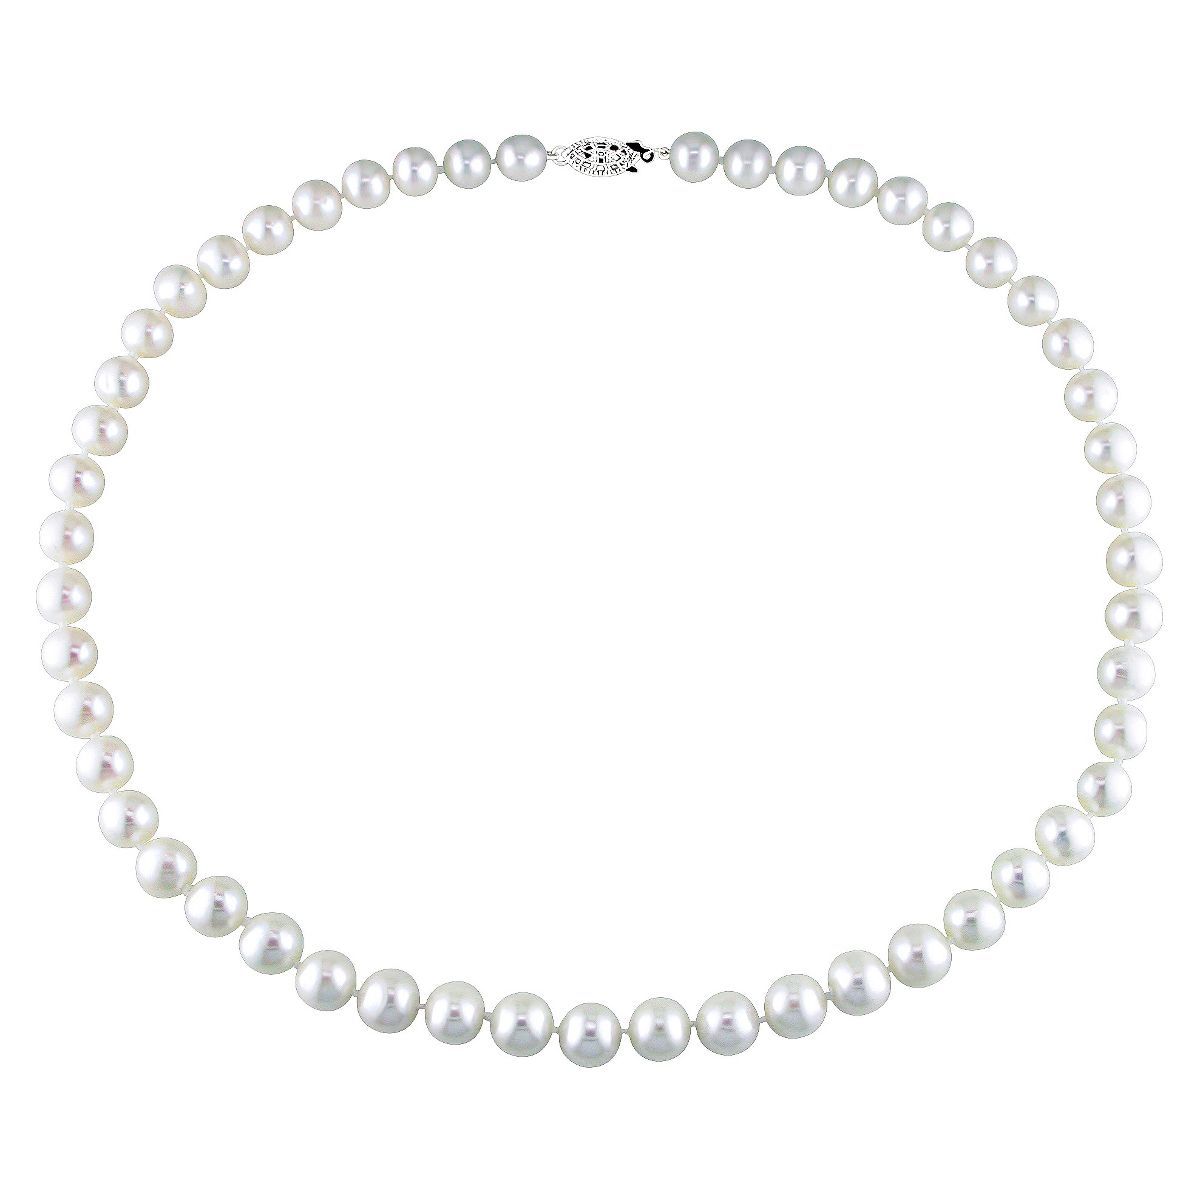 7.5-8mm Cultured Freshwater Pearl Necklace in Sterling Silver - 18" - White | Target